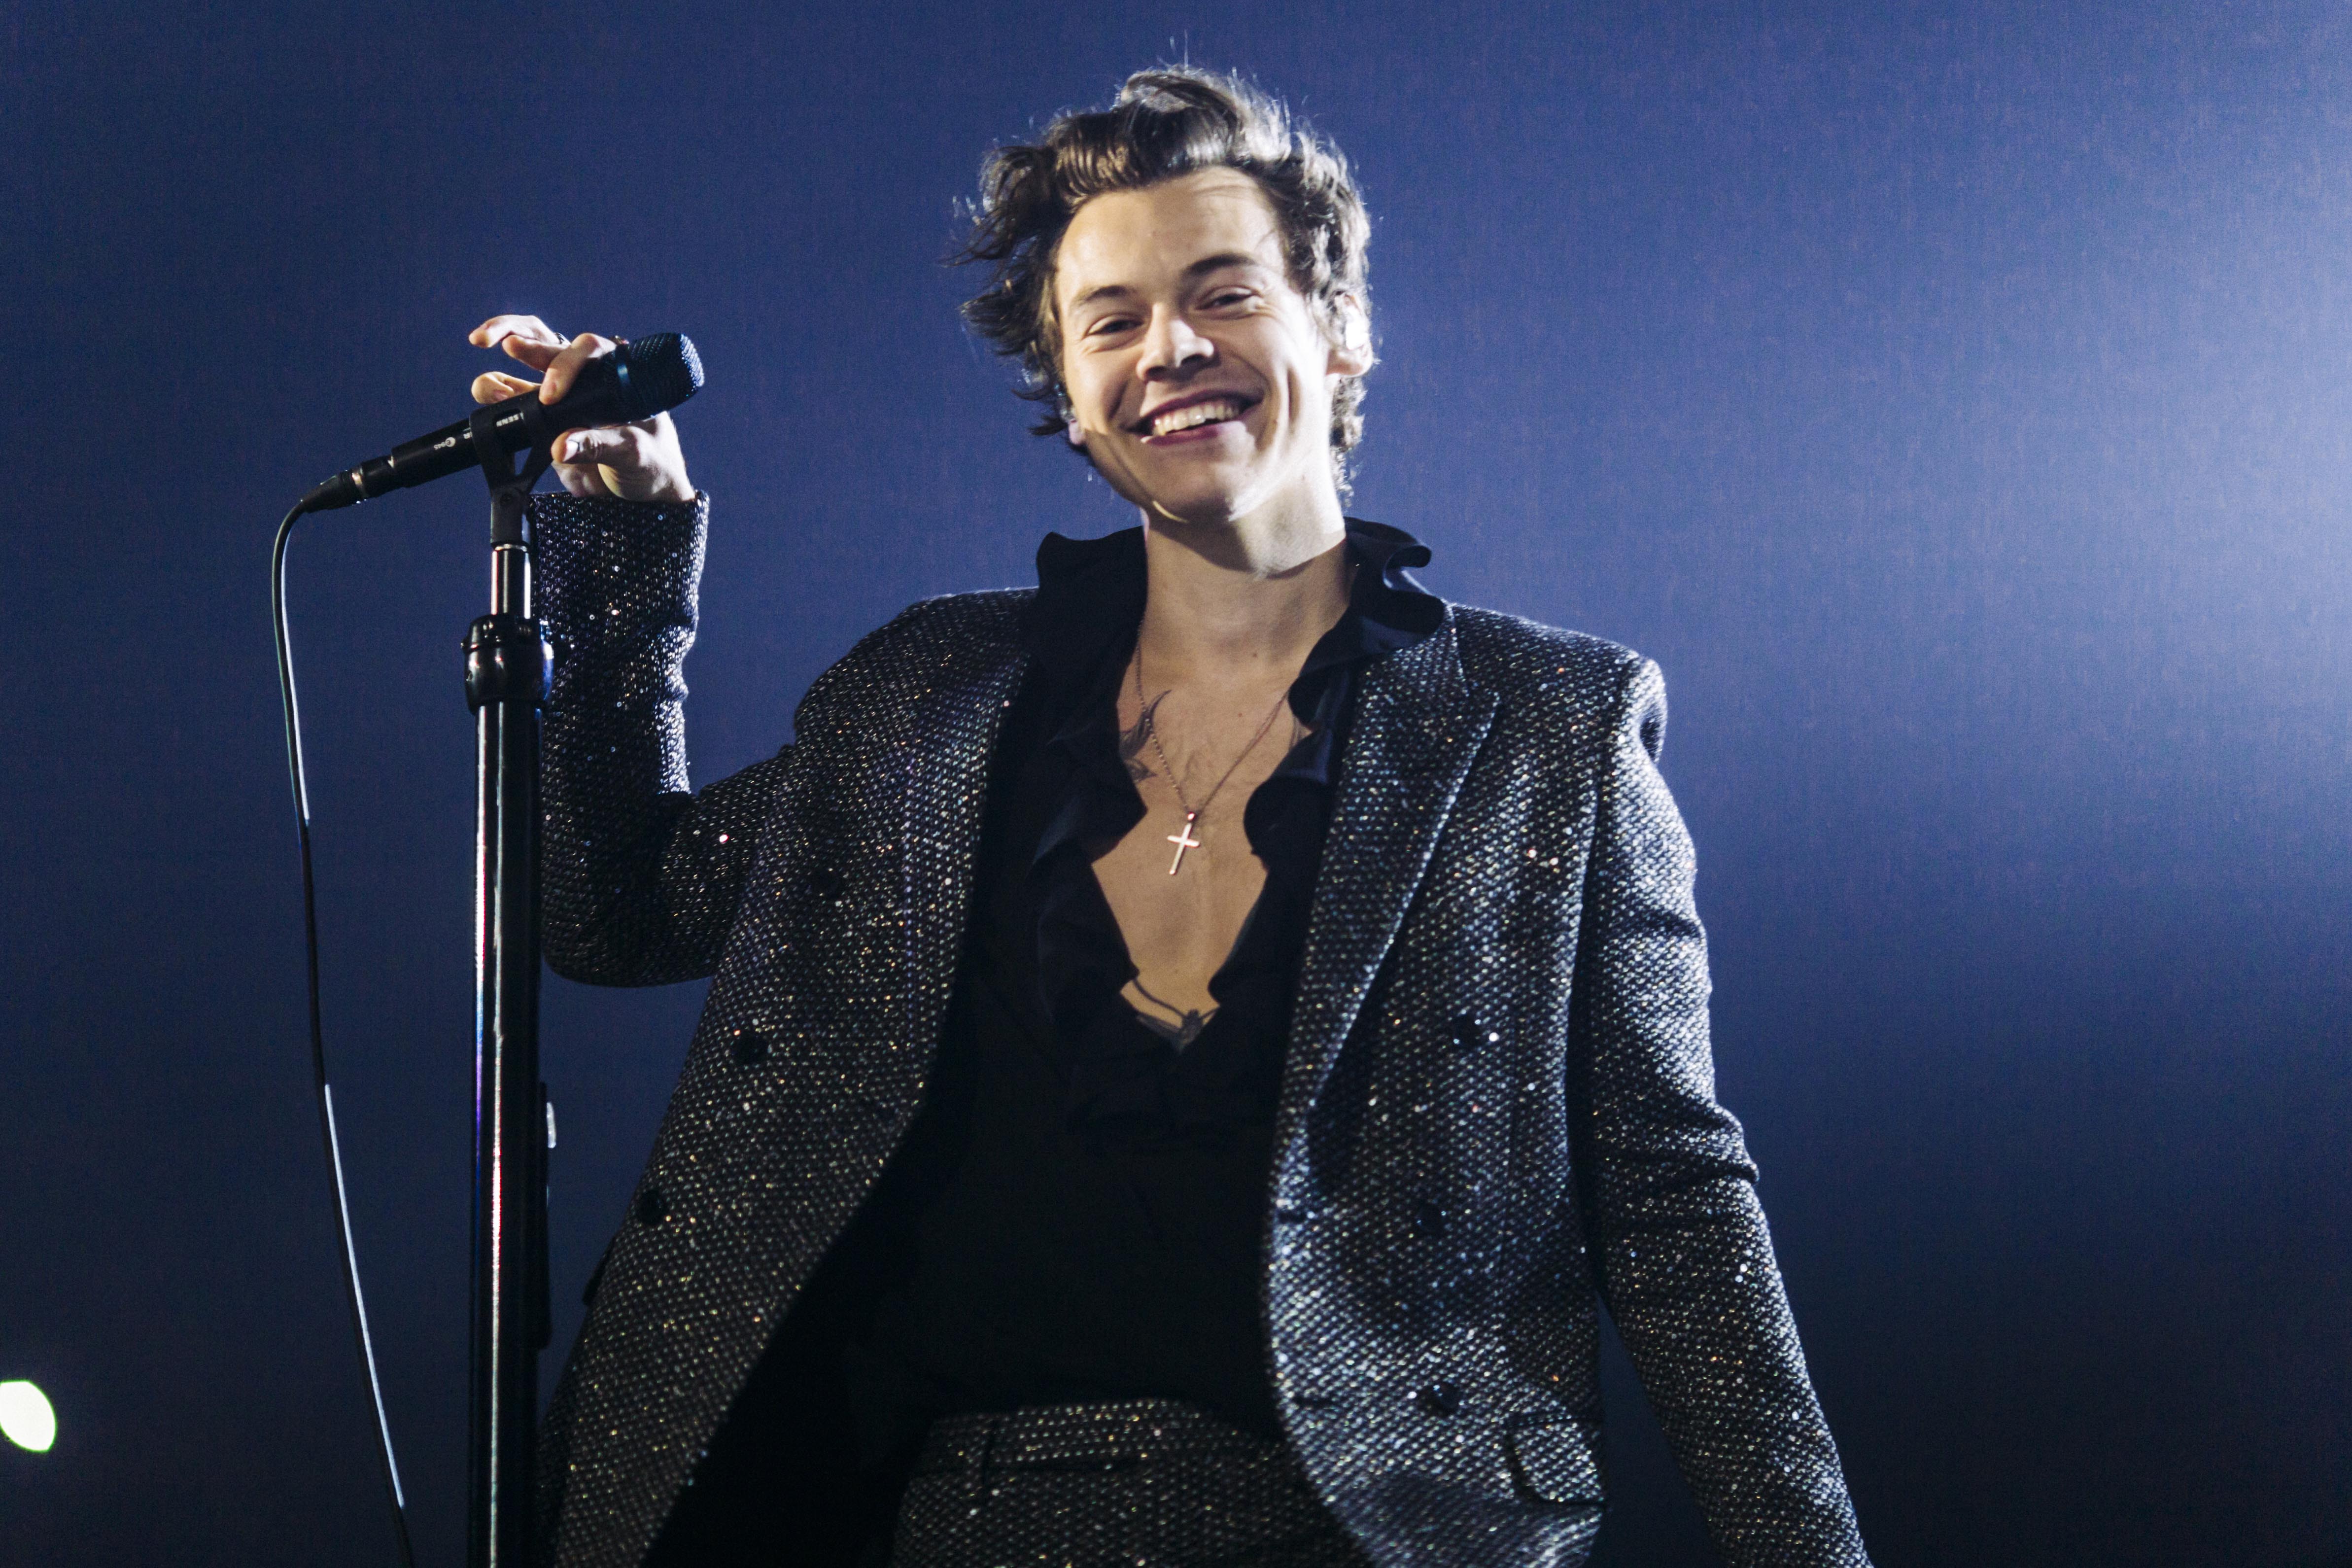 Harry Styles Dedicates New Music Video To Touching [WATCH]